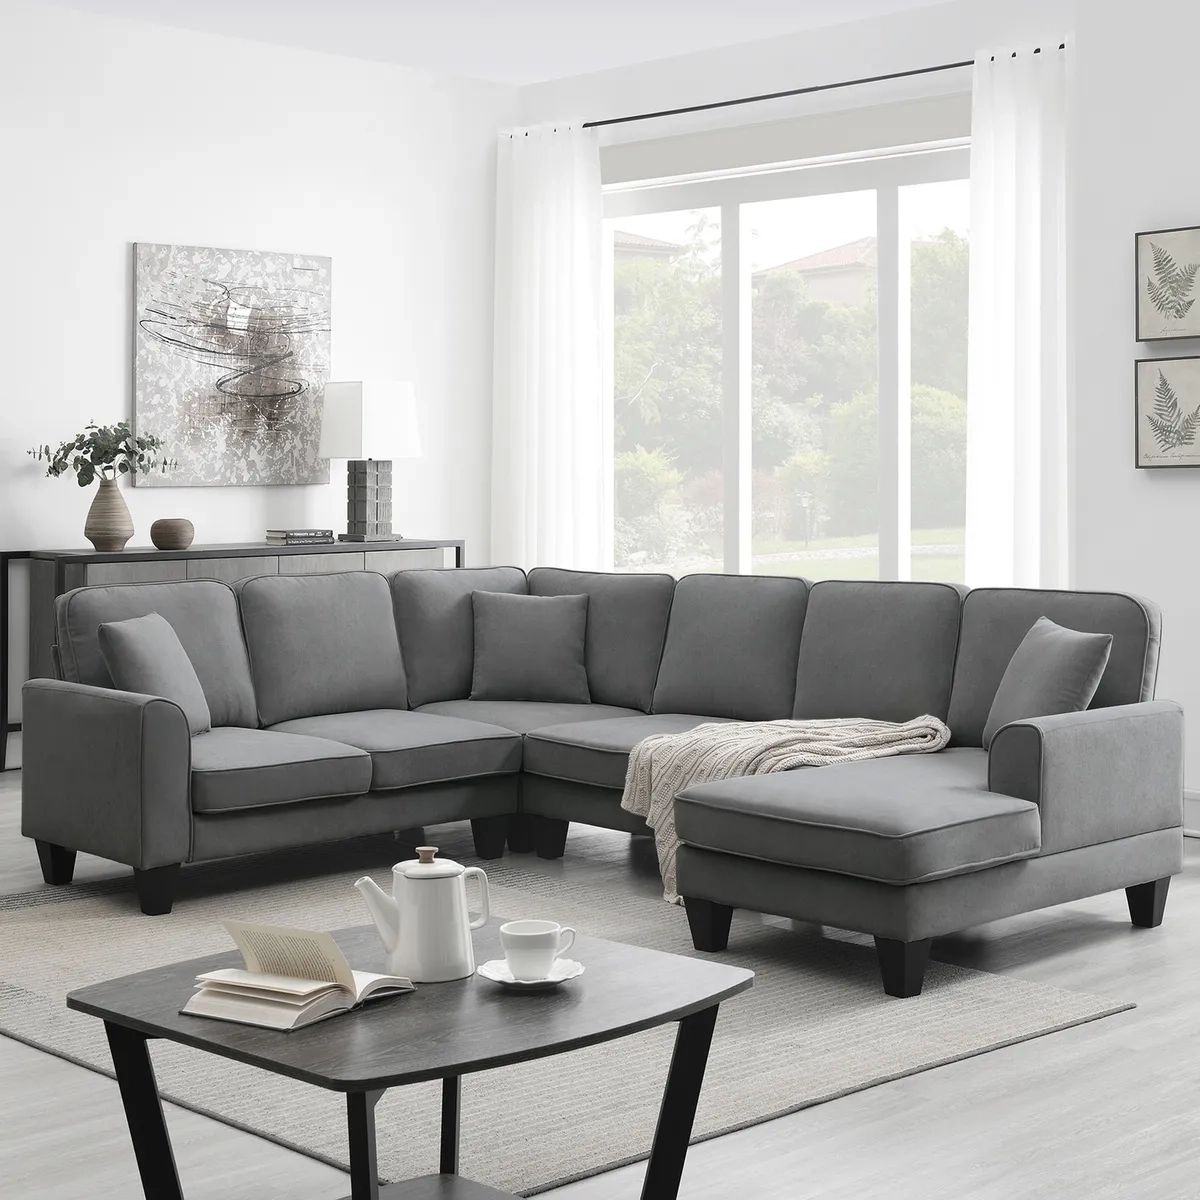 7 Seat Sectional Sofa Set Modern Furniture U Shape Couch Living Room, 3  Pillow | Ebay For Modern U Shaped Sectional Couch Sets (Photo 2 of 15)